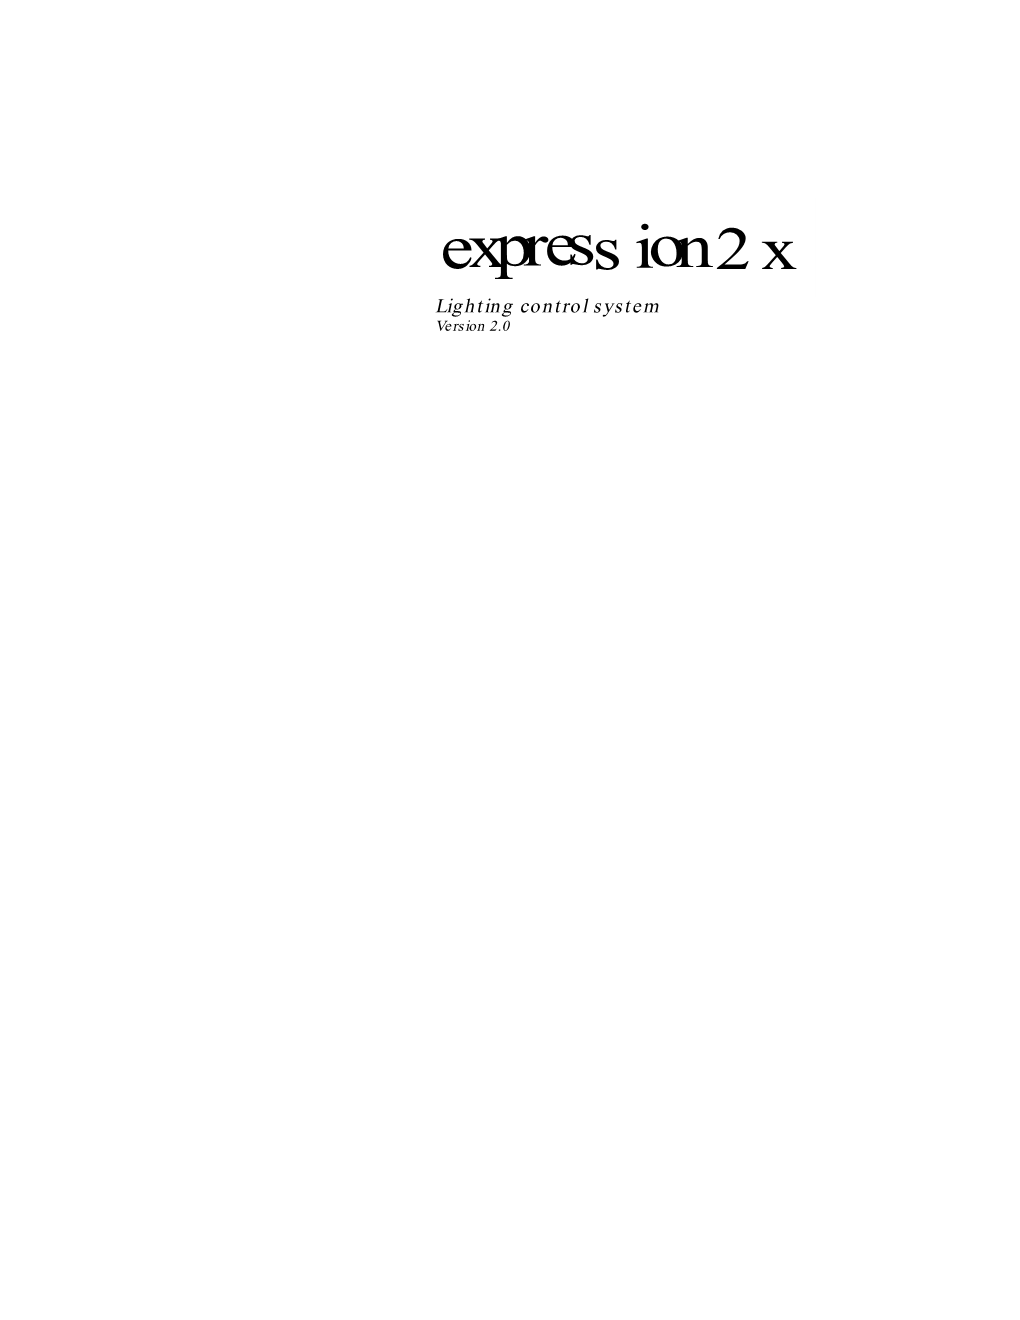 Expression2x Lighting Control System Version 2.0